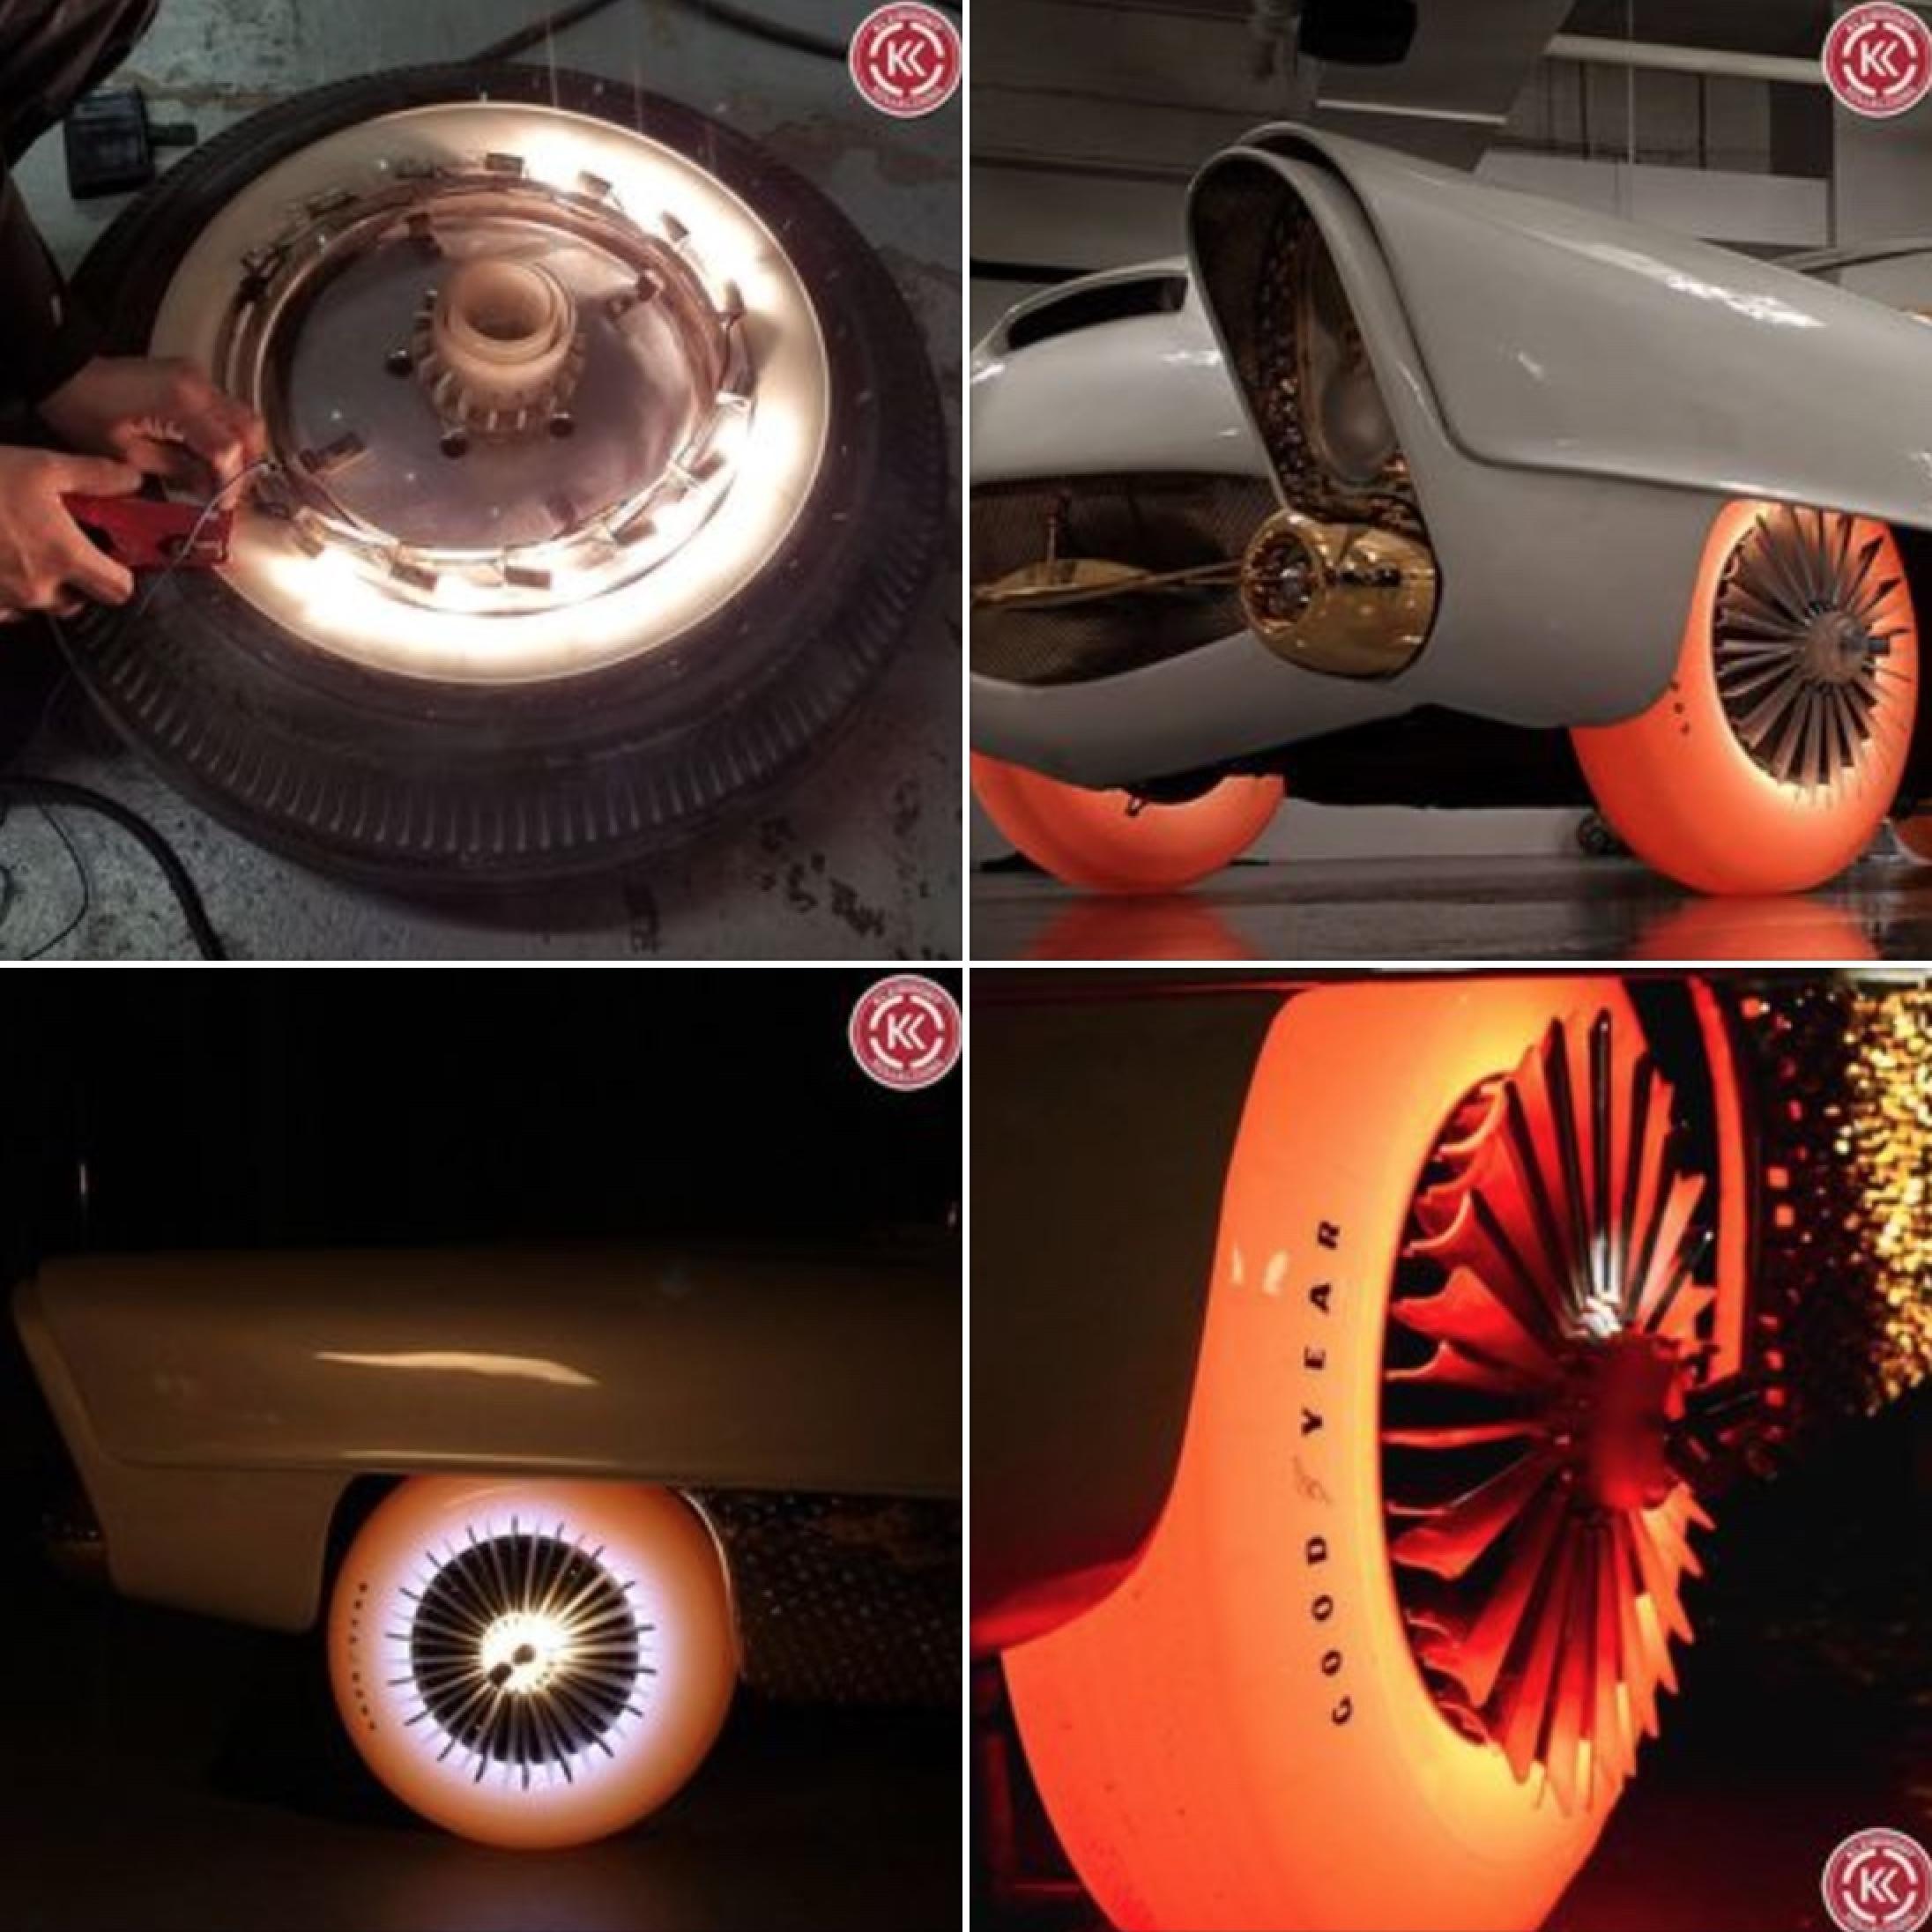 How Goodyear the Glowing in 1961 |